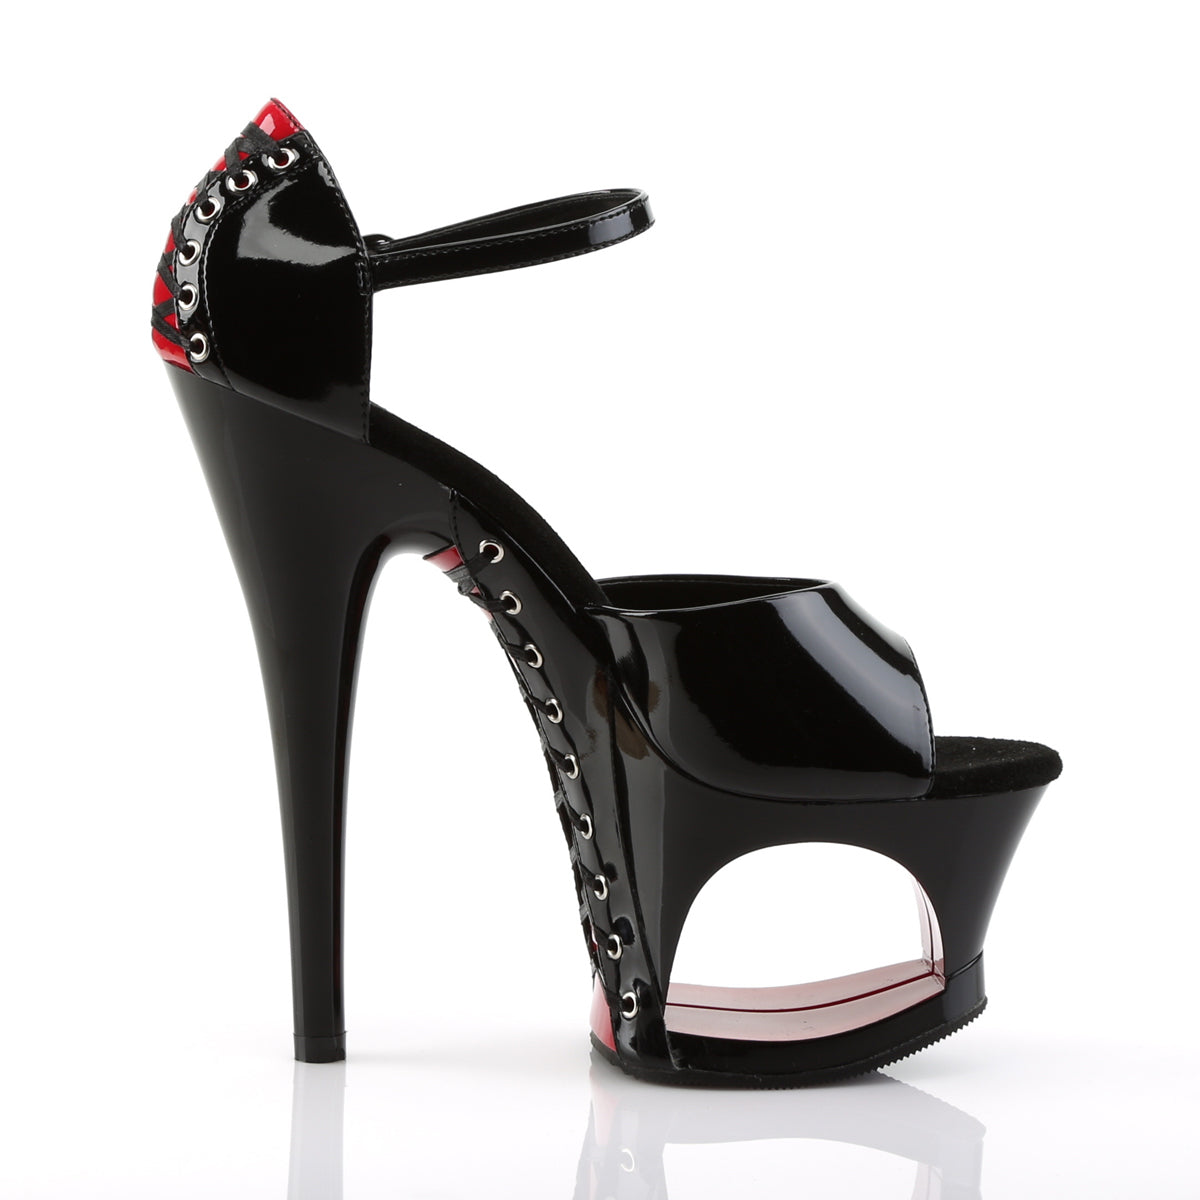 MOON-760FH 7" Heel Black and Red Pole Dancing Platforms-Pleaser- Sexy Shoes Fetish Heels